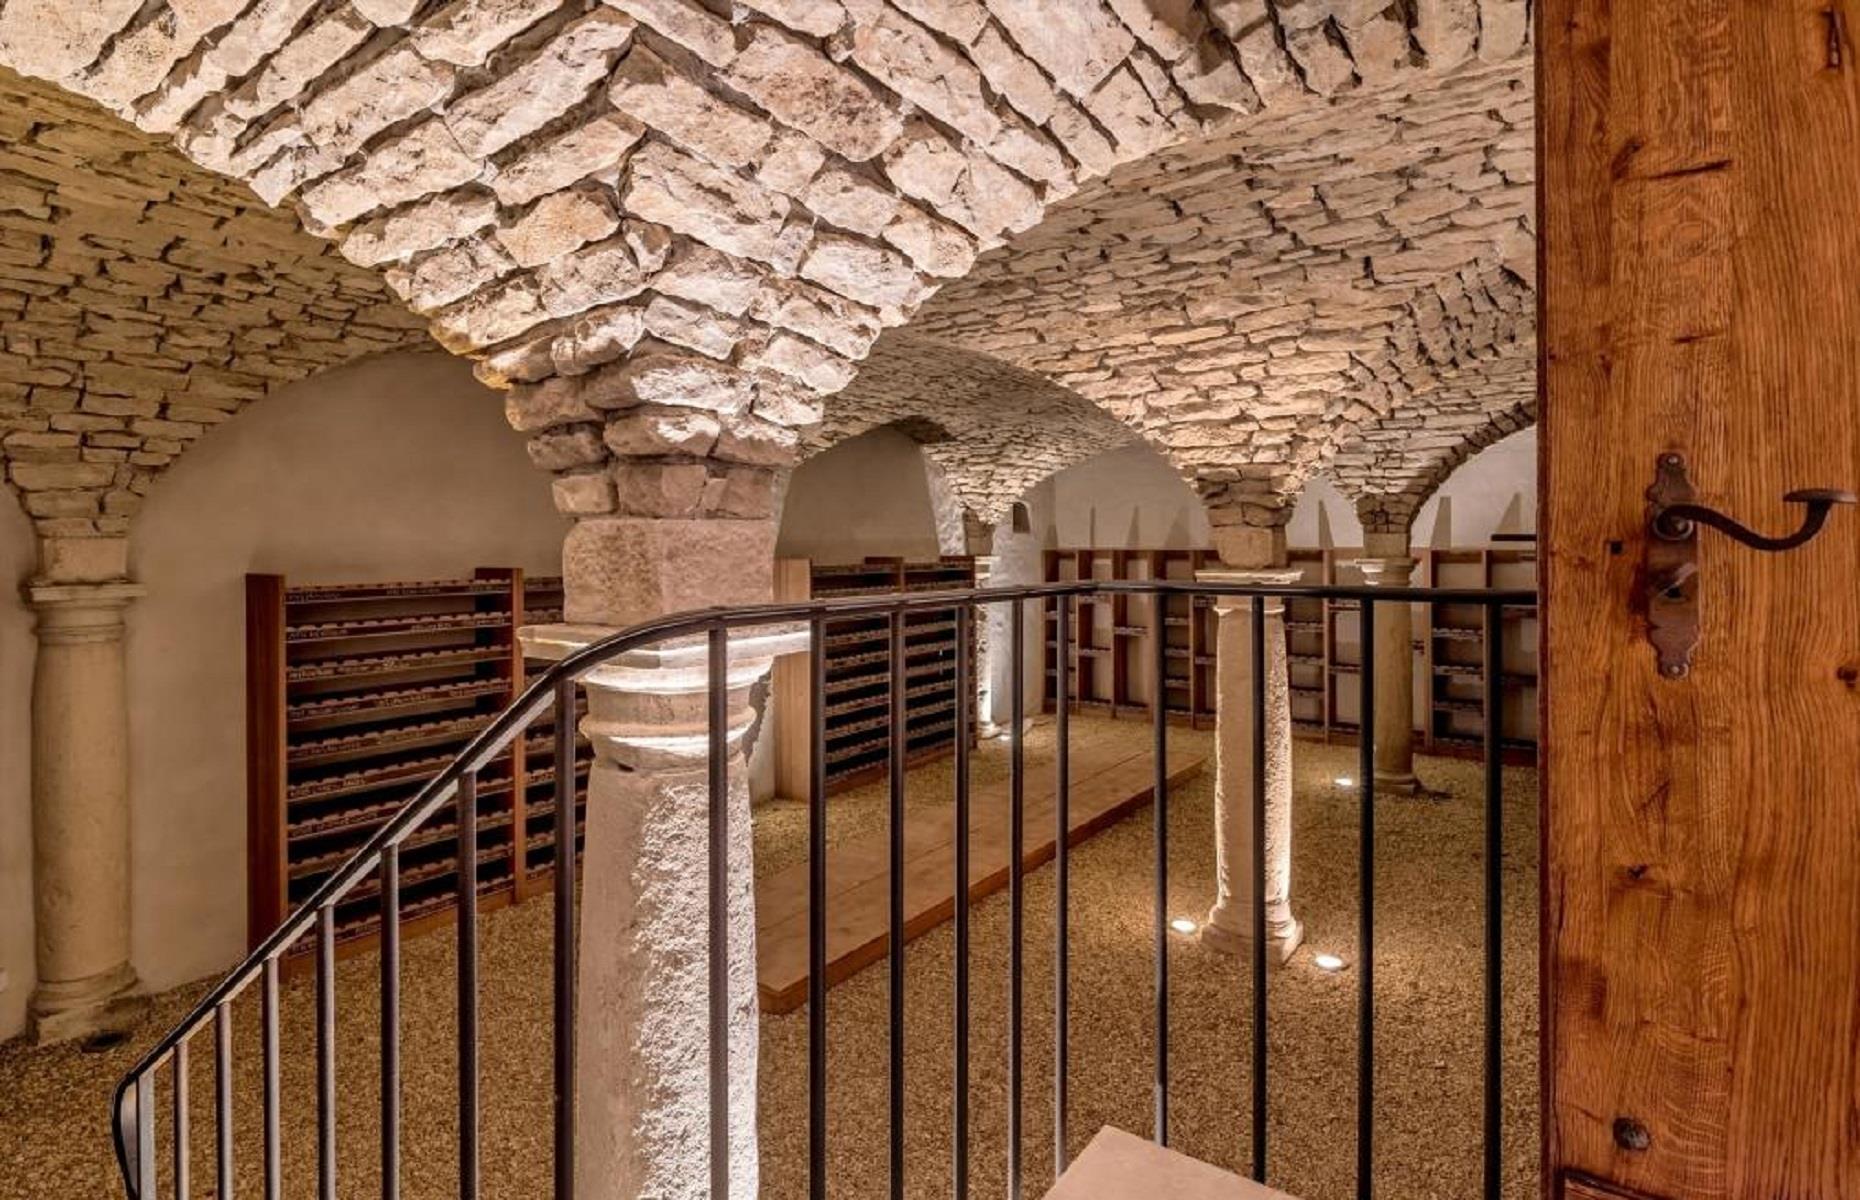 <p>A secret underground tunnel serves as a private art gallery and links the two buildings on the estate. Oh, and there's also a luxurious vaulted basement, which serves as a tasting room and a storage cellar for the finest vintages.</p>  <p><a href="https://www.naef-prestige.ch/en/buy/house/vaud.chexbres/detail/stupendous-14-room-mansion-property-with-caretaker-house-for-sale-at-chexbres/">On the market</a> in May 2024 for CHF 19 million, which equates to £16.4 million ($20.8m), the impressive castle is truly unmatched.</p>